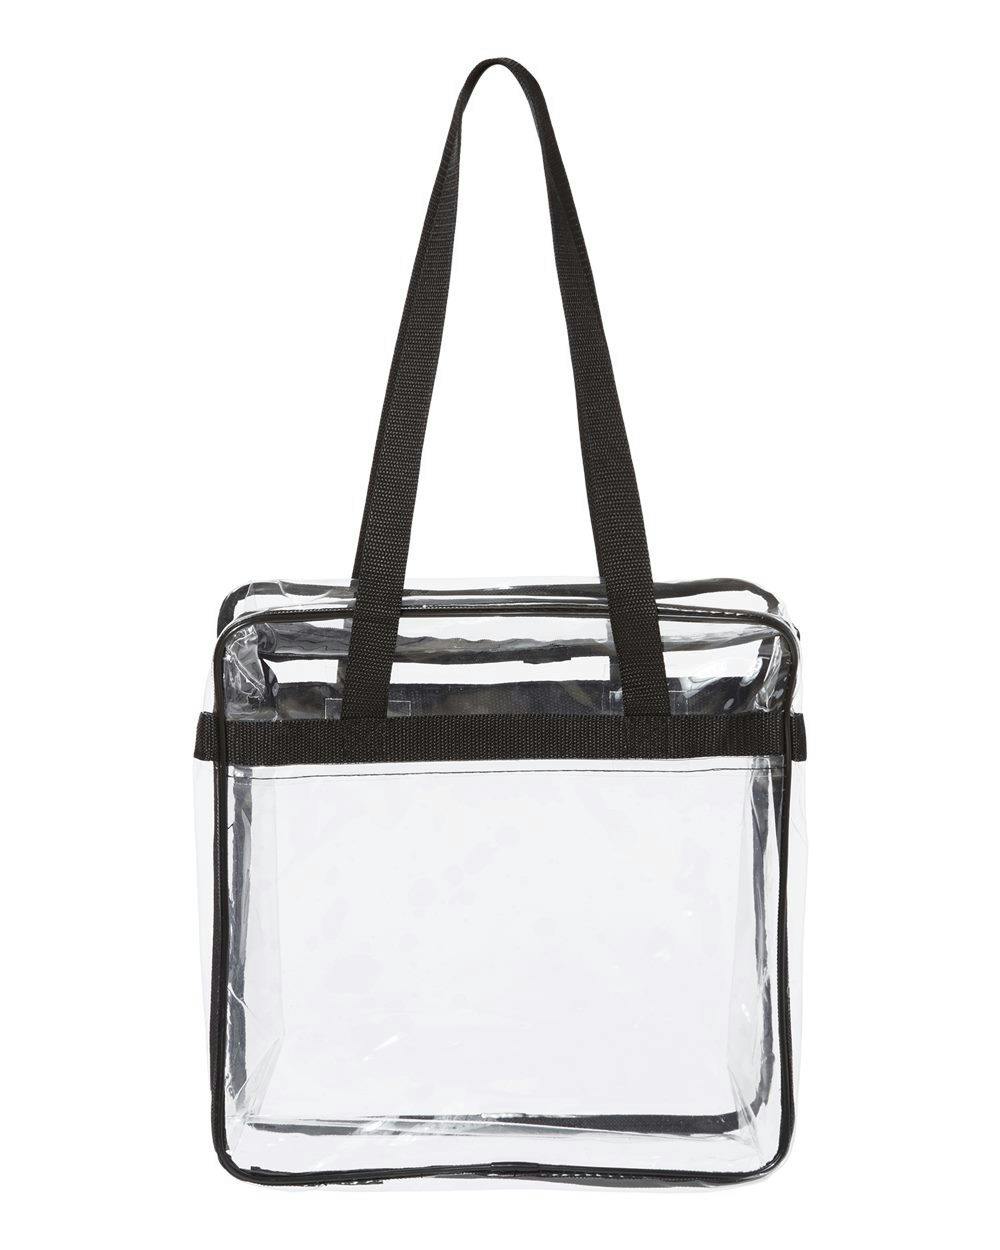 Image for OAD Clear Tote with Zippered Top - OAD5005